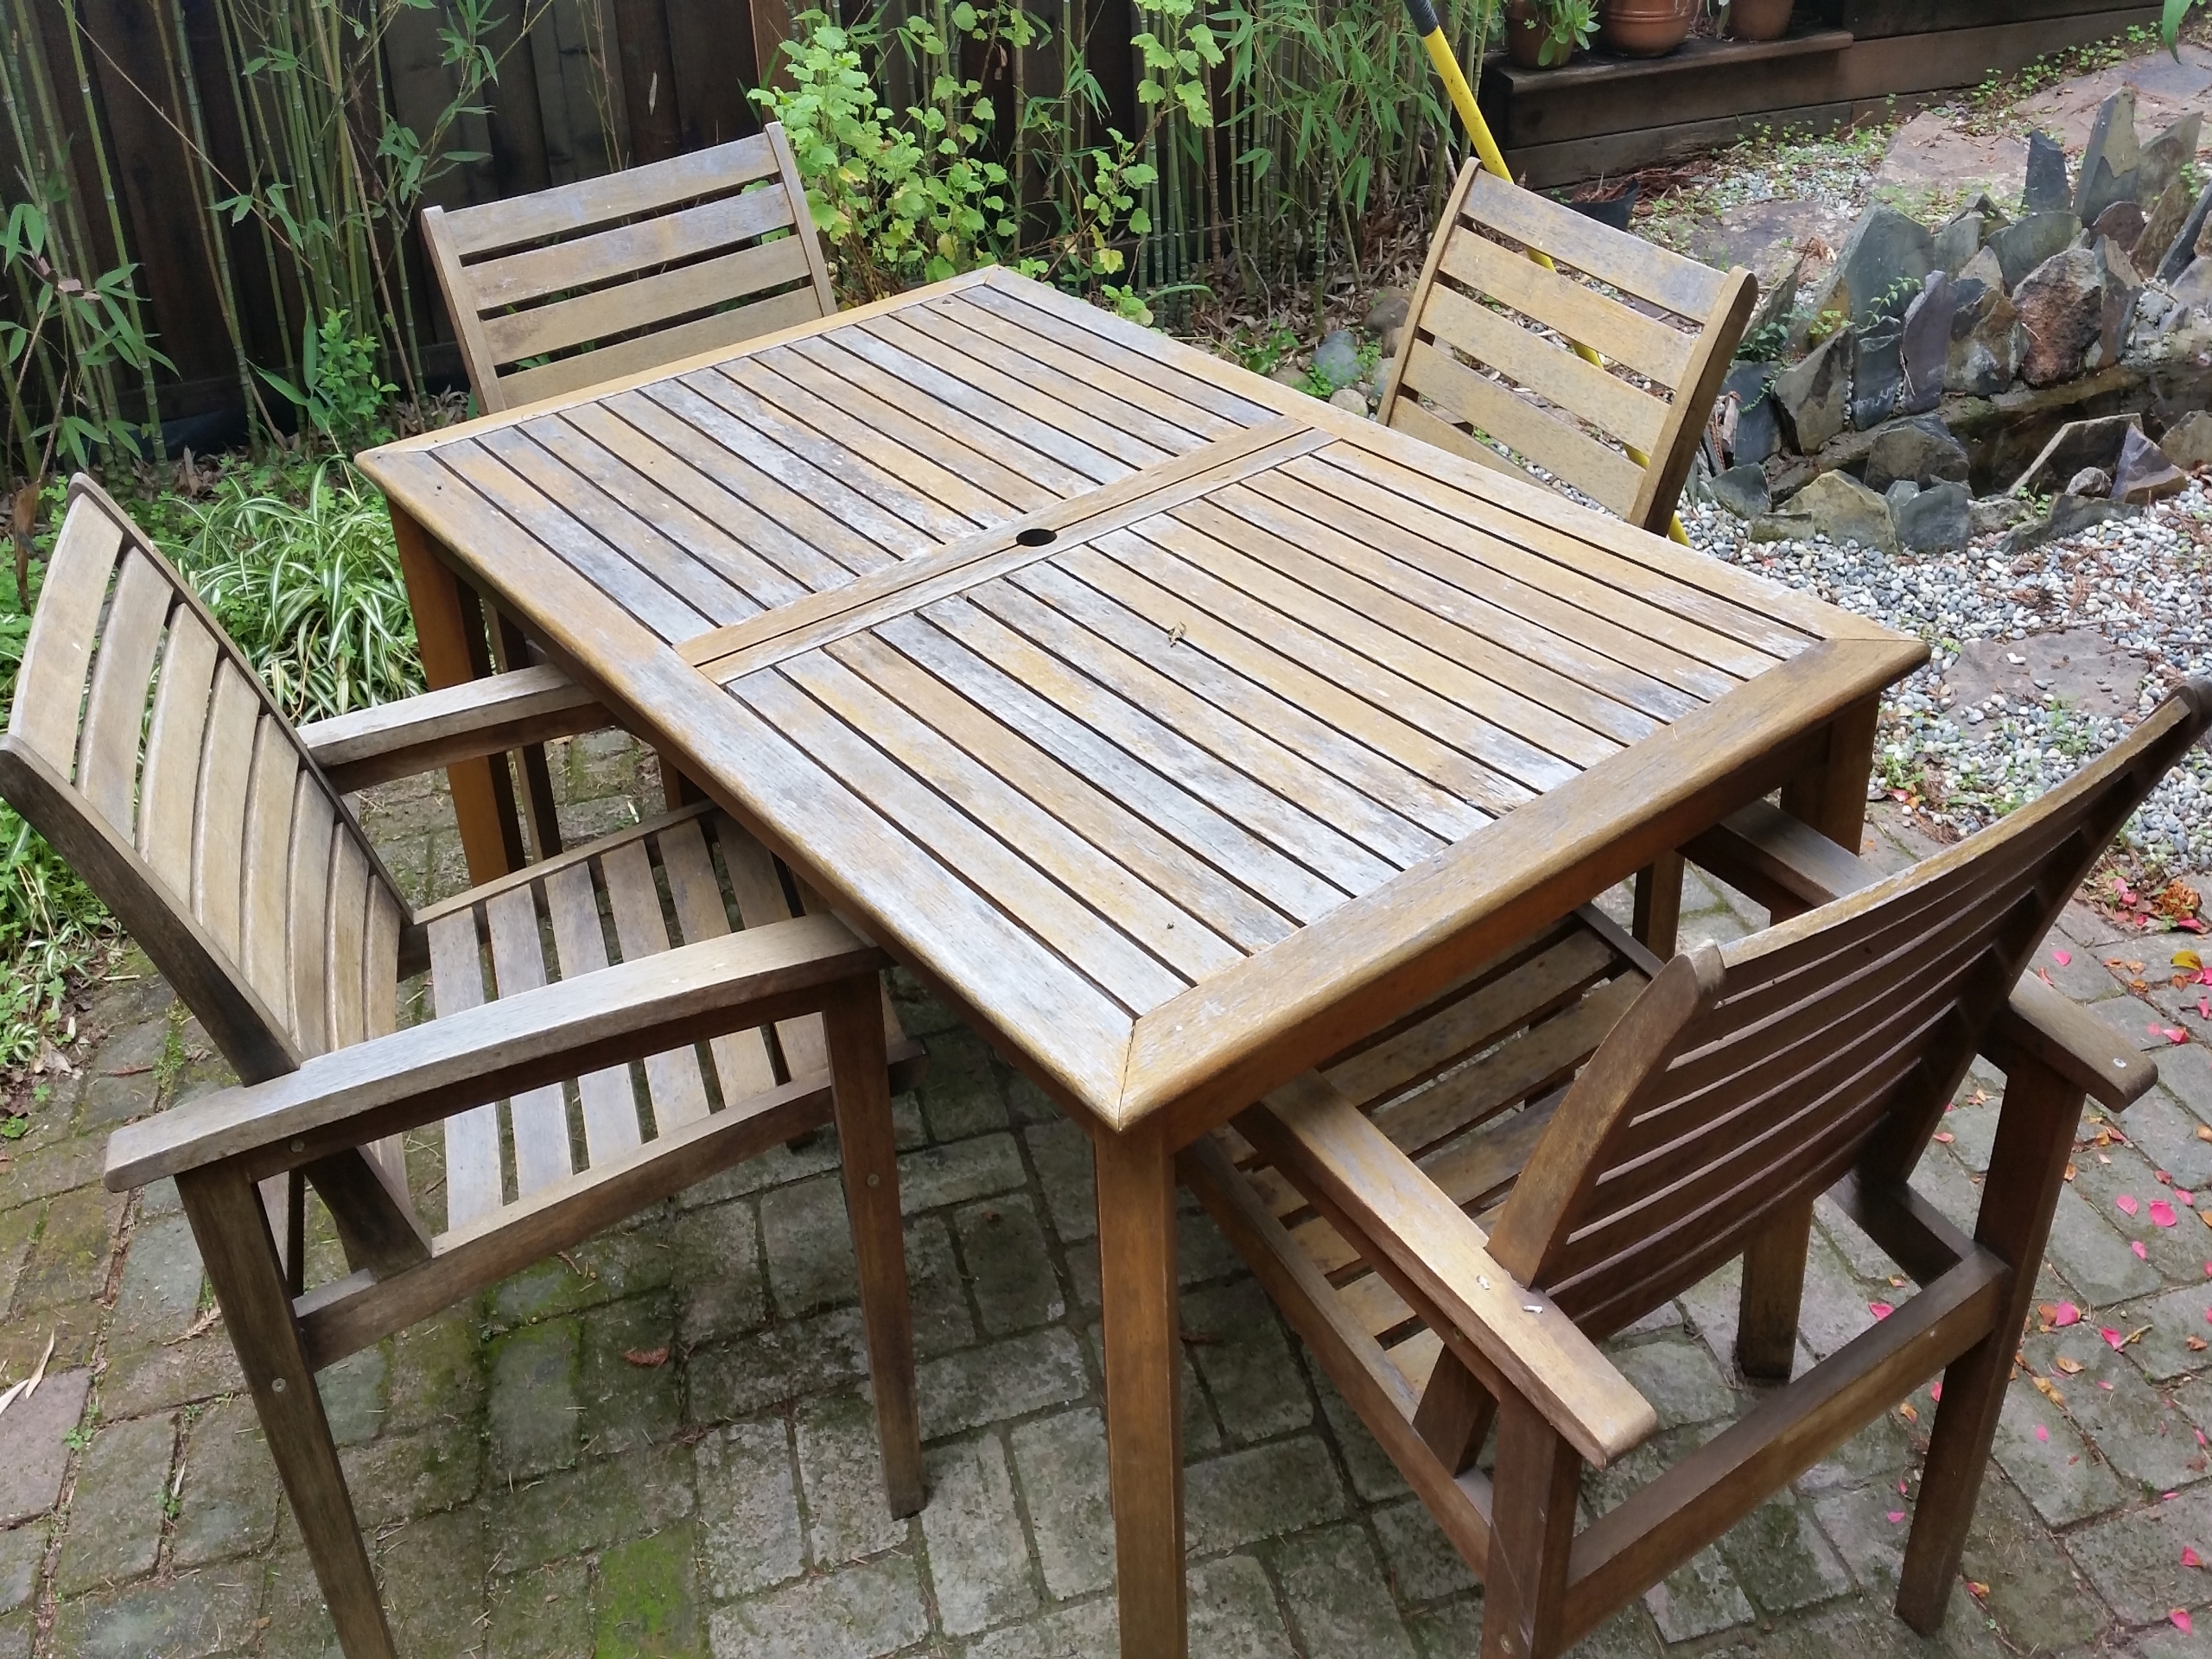 Enhance Your Outdoor Living With Teak Furniture